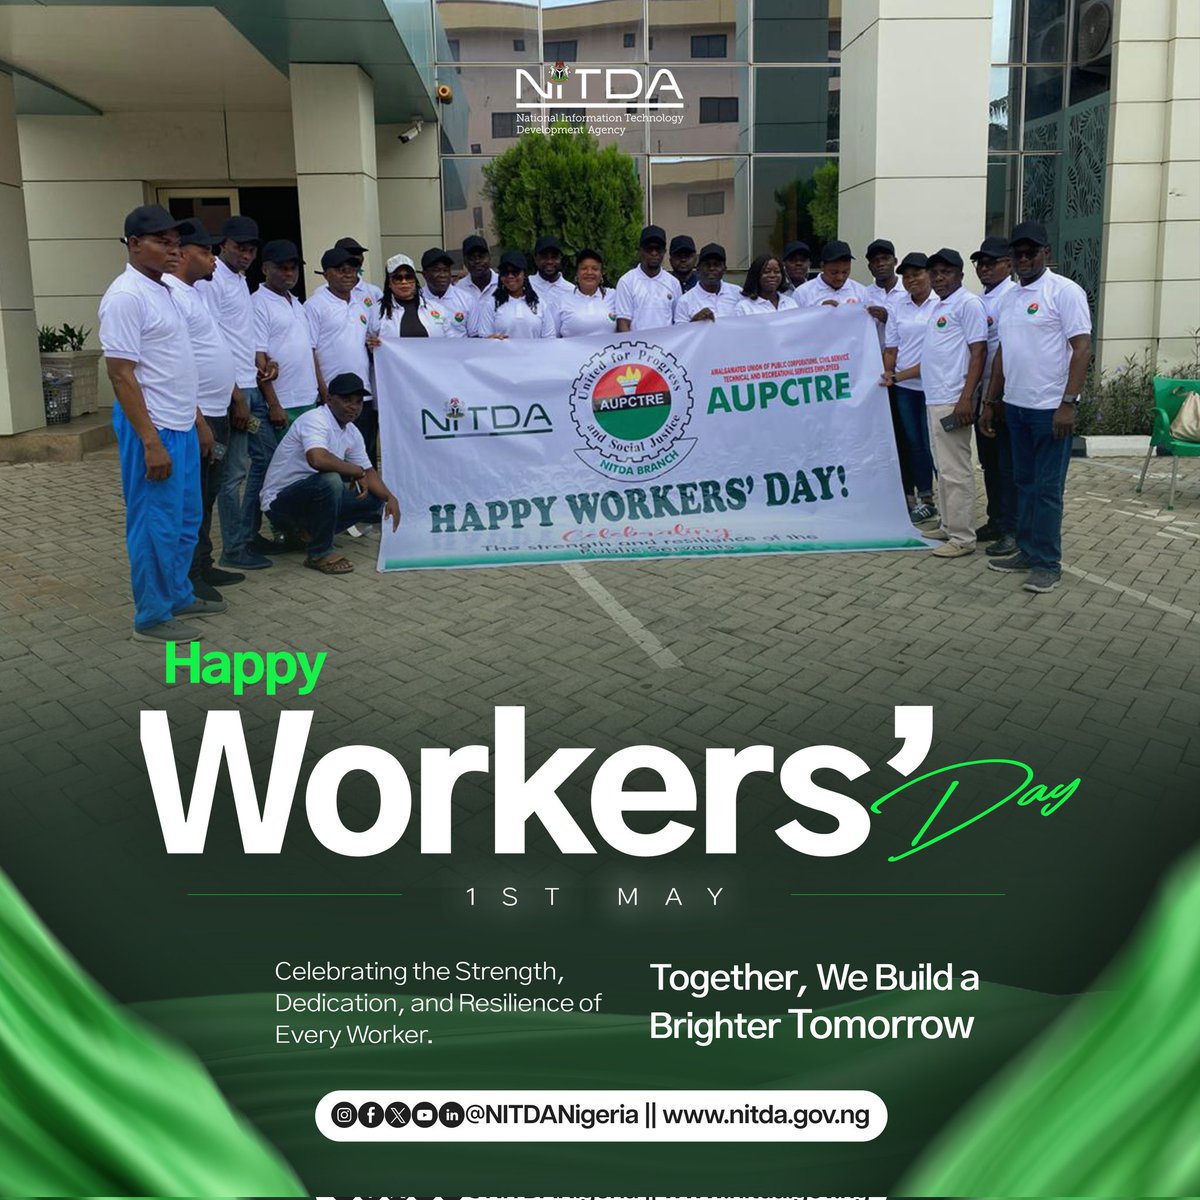 Celebrating the Strength, Dedication and Resilience of Every Worker. Together We Build A Better Tomorrow! #HappyInternationalWorkersDay